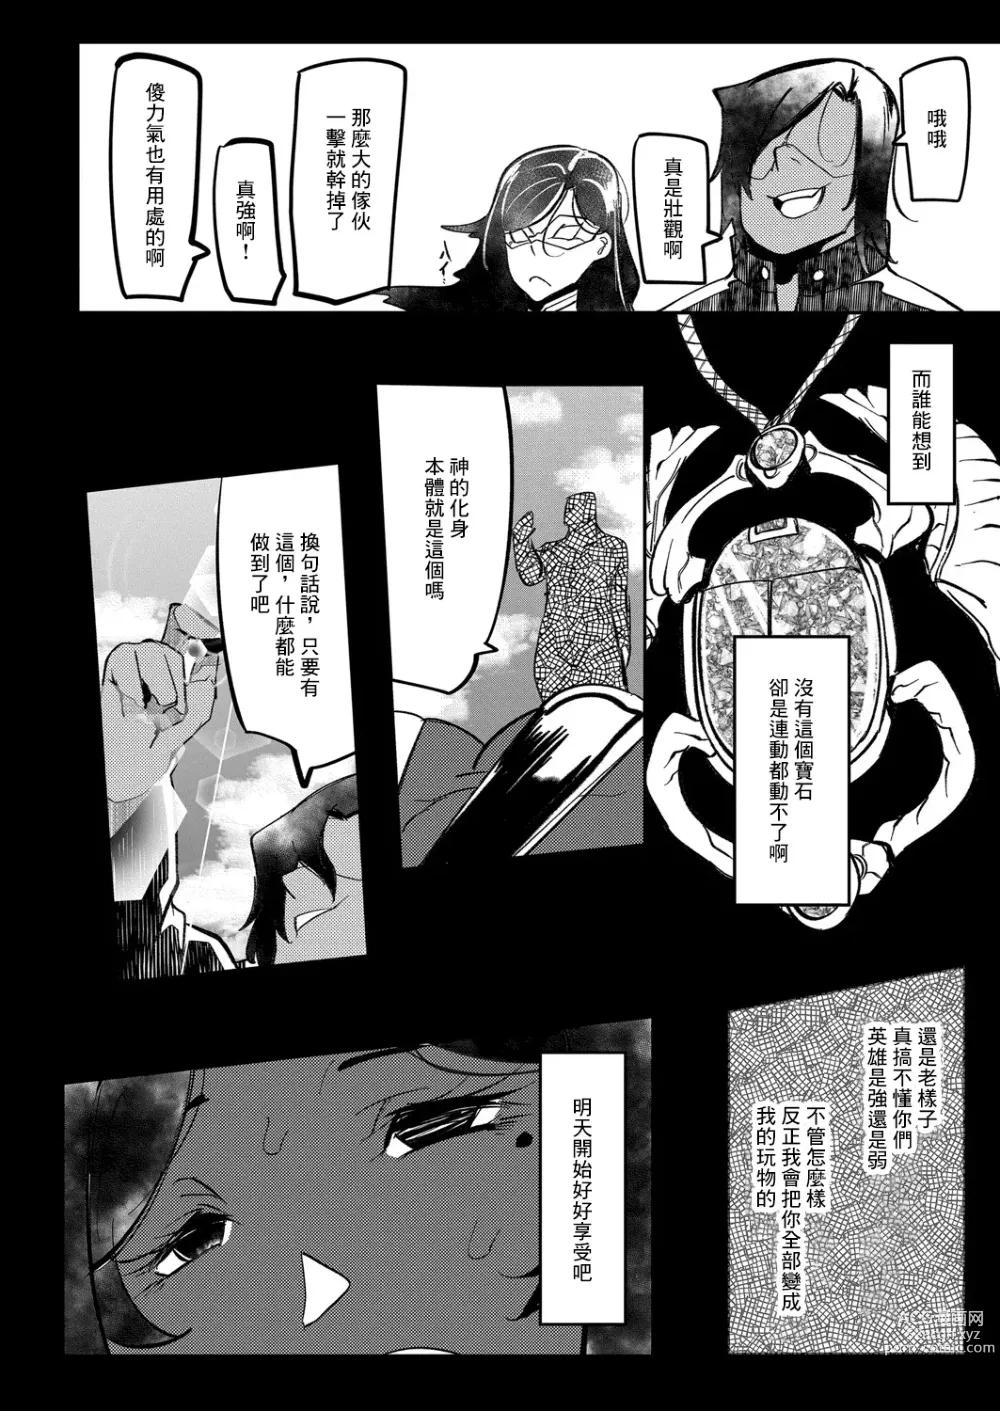 Page 4 of manga HERO DAY TIME Ch. 4